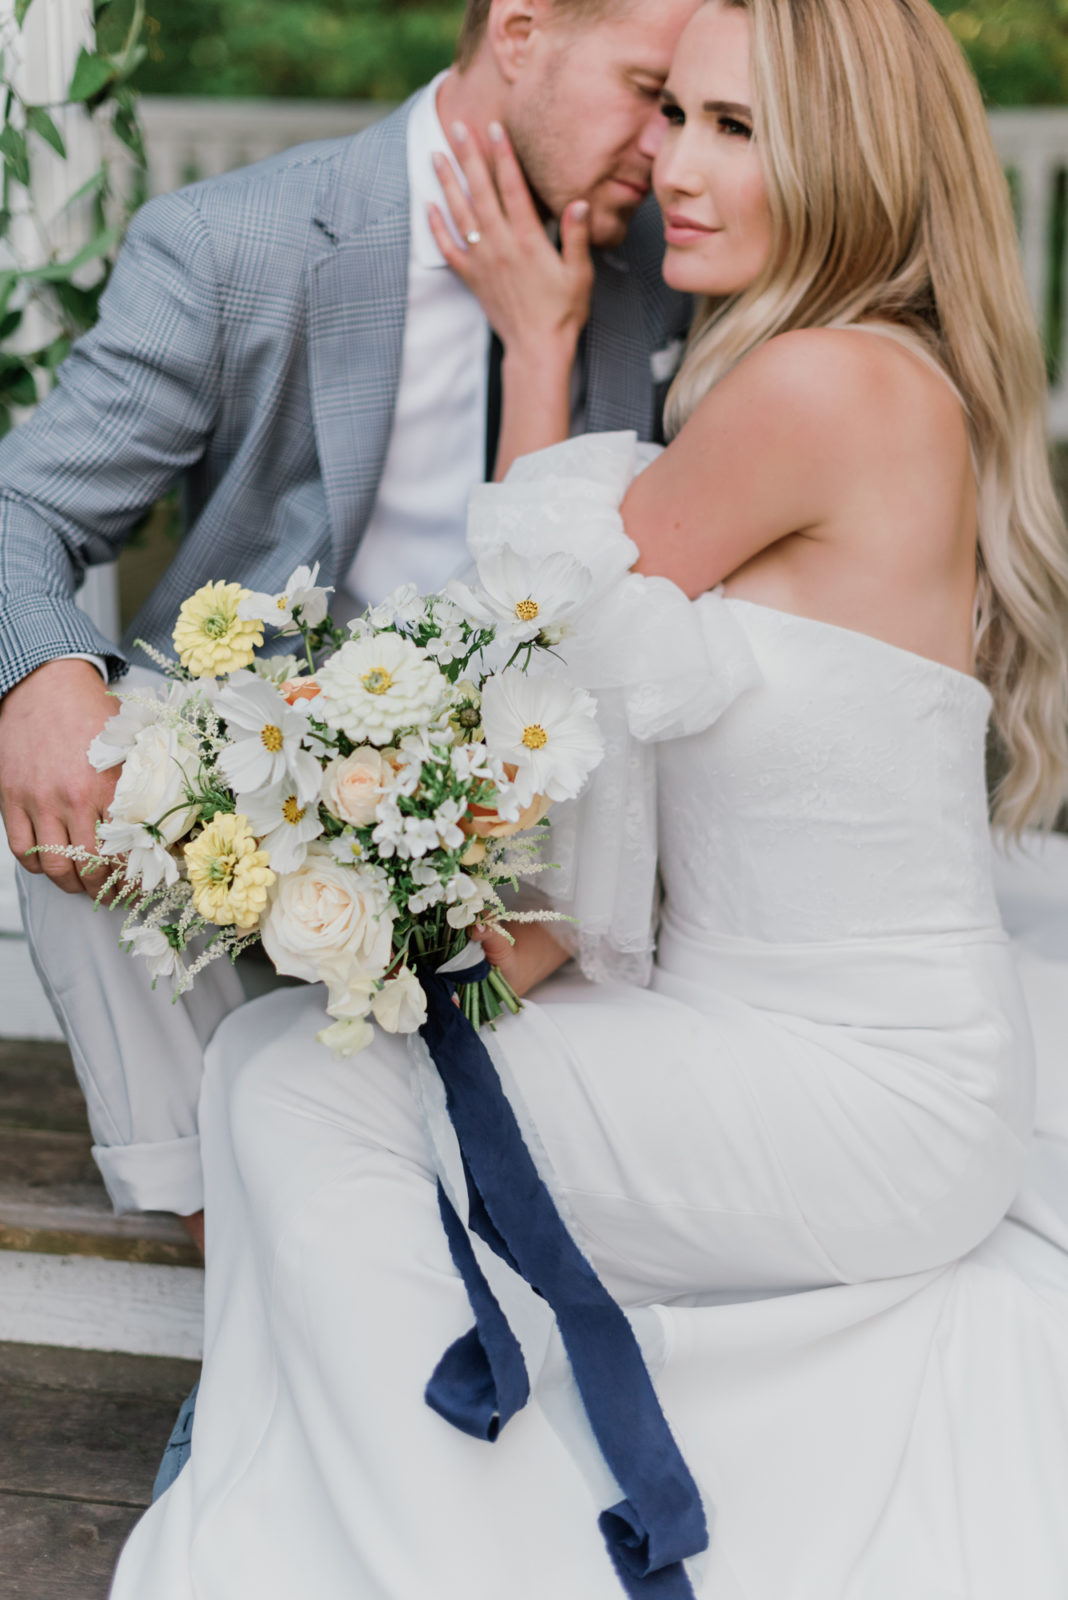 Pantone Colours of The Year In this Gorgeous Portugal-Inspired Wedding Editorial Featured by Brontë Bride, yellow and white flowers, blue accents